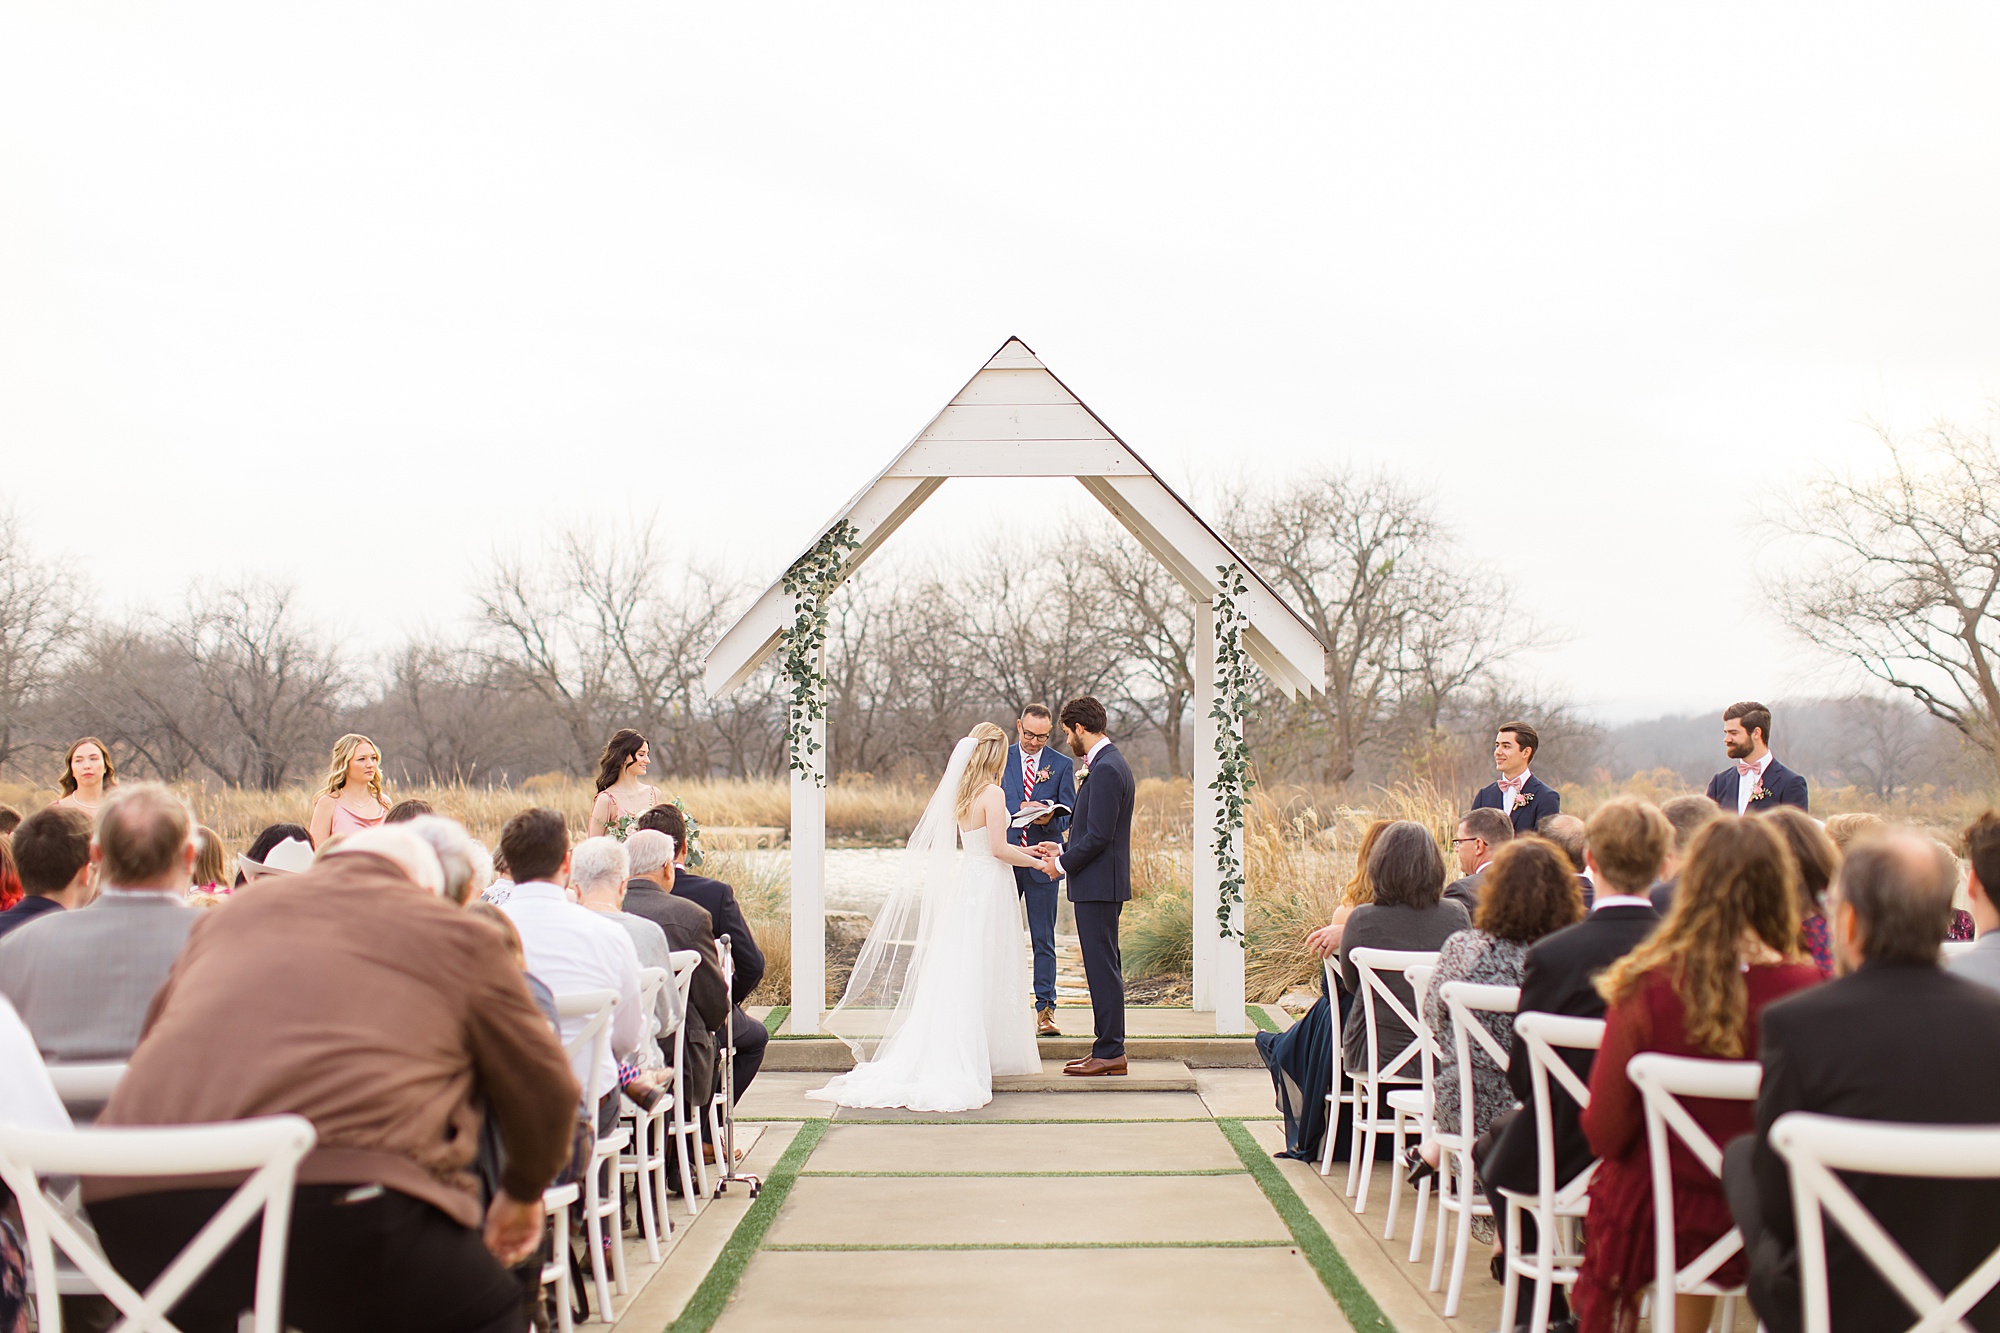 couple exchanges vows during outdoor wedding ceremony in the winter